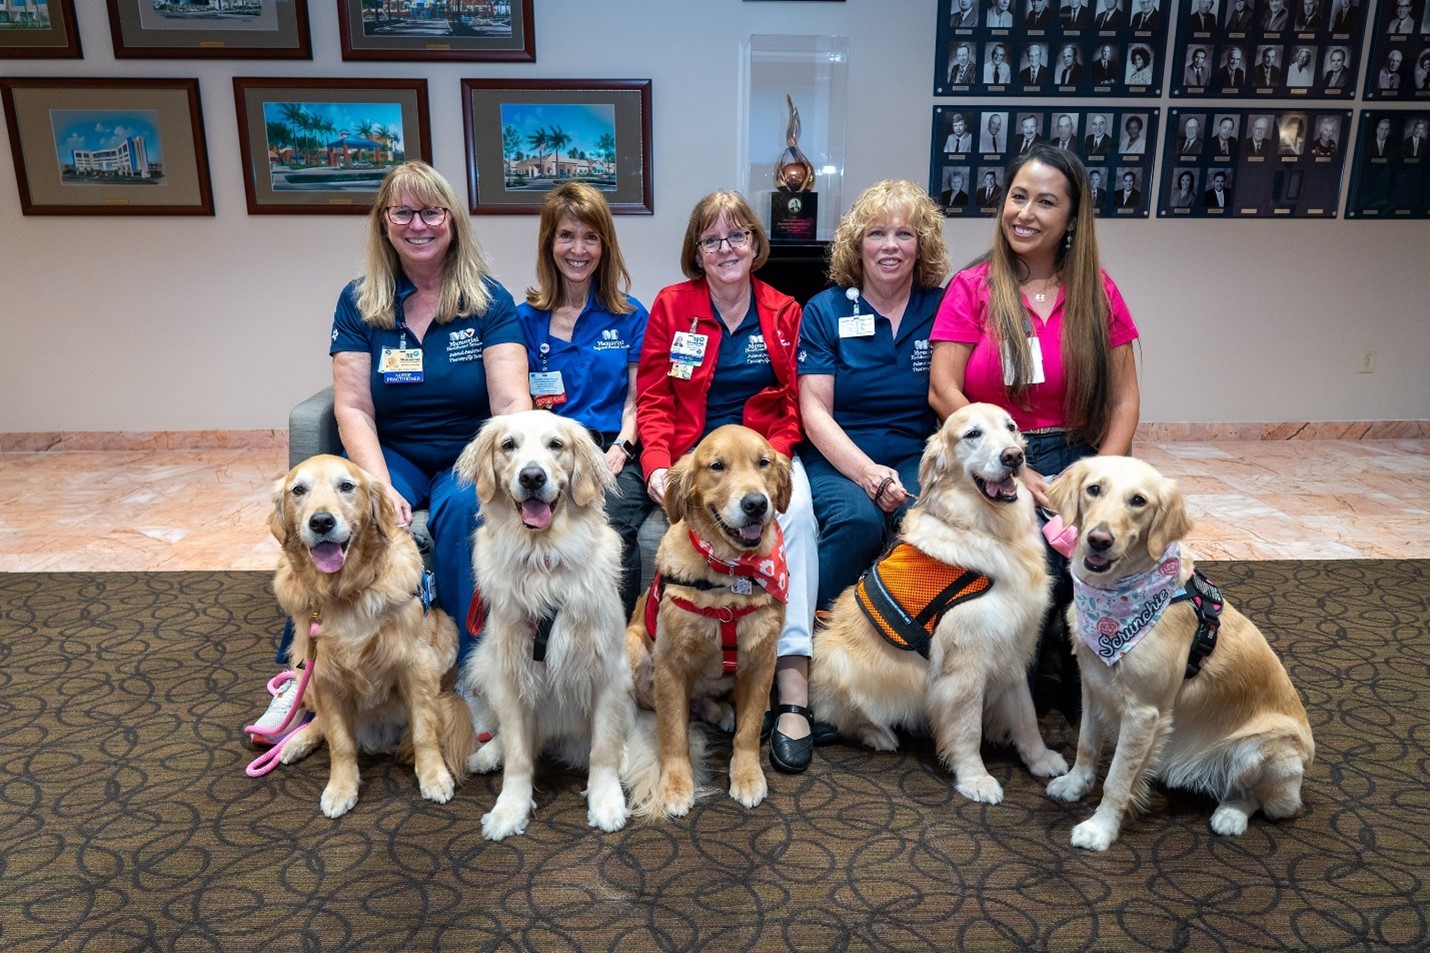 Therapy dogs play a very important role in cheering patients, families and employees too!